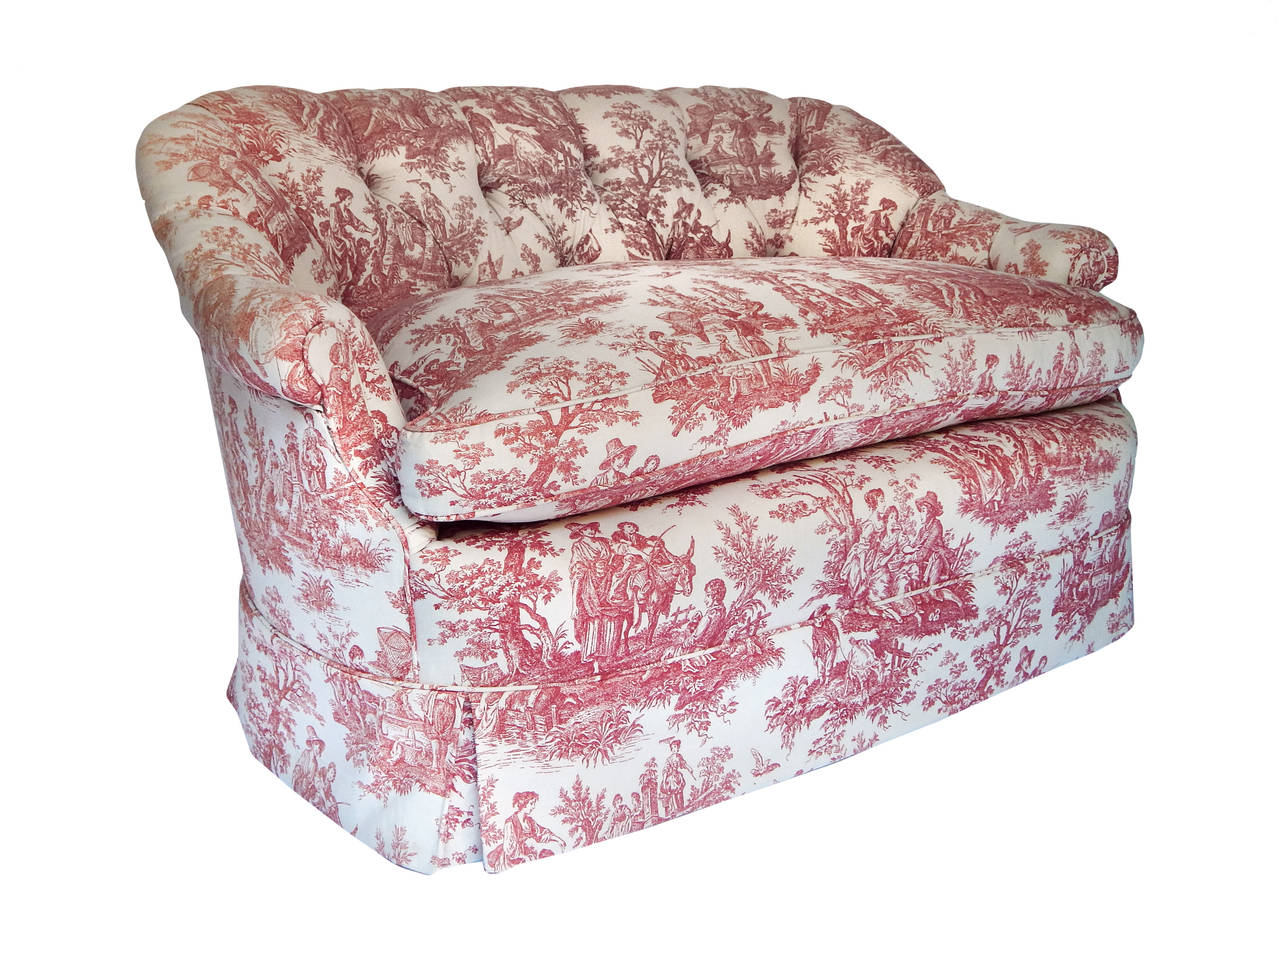 Pair of Tufted Toile Loveseats 2